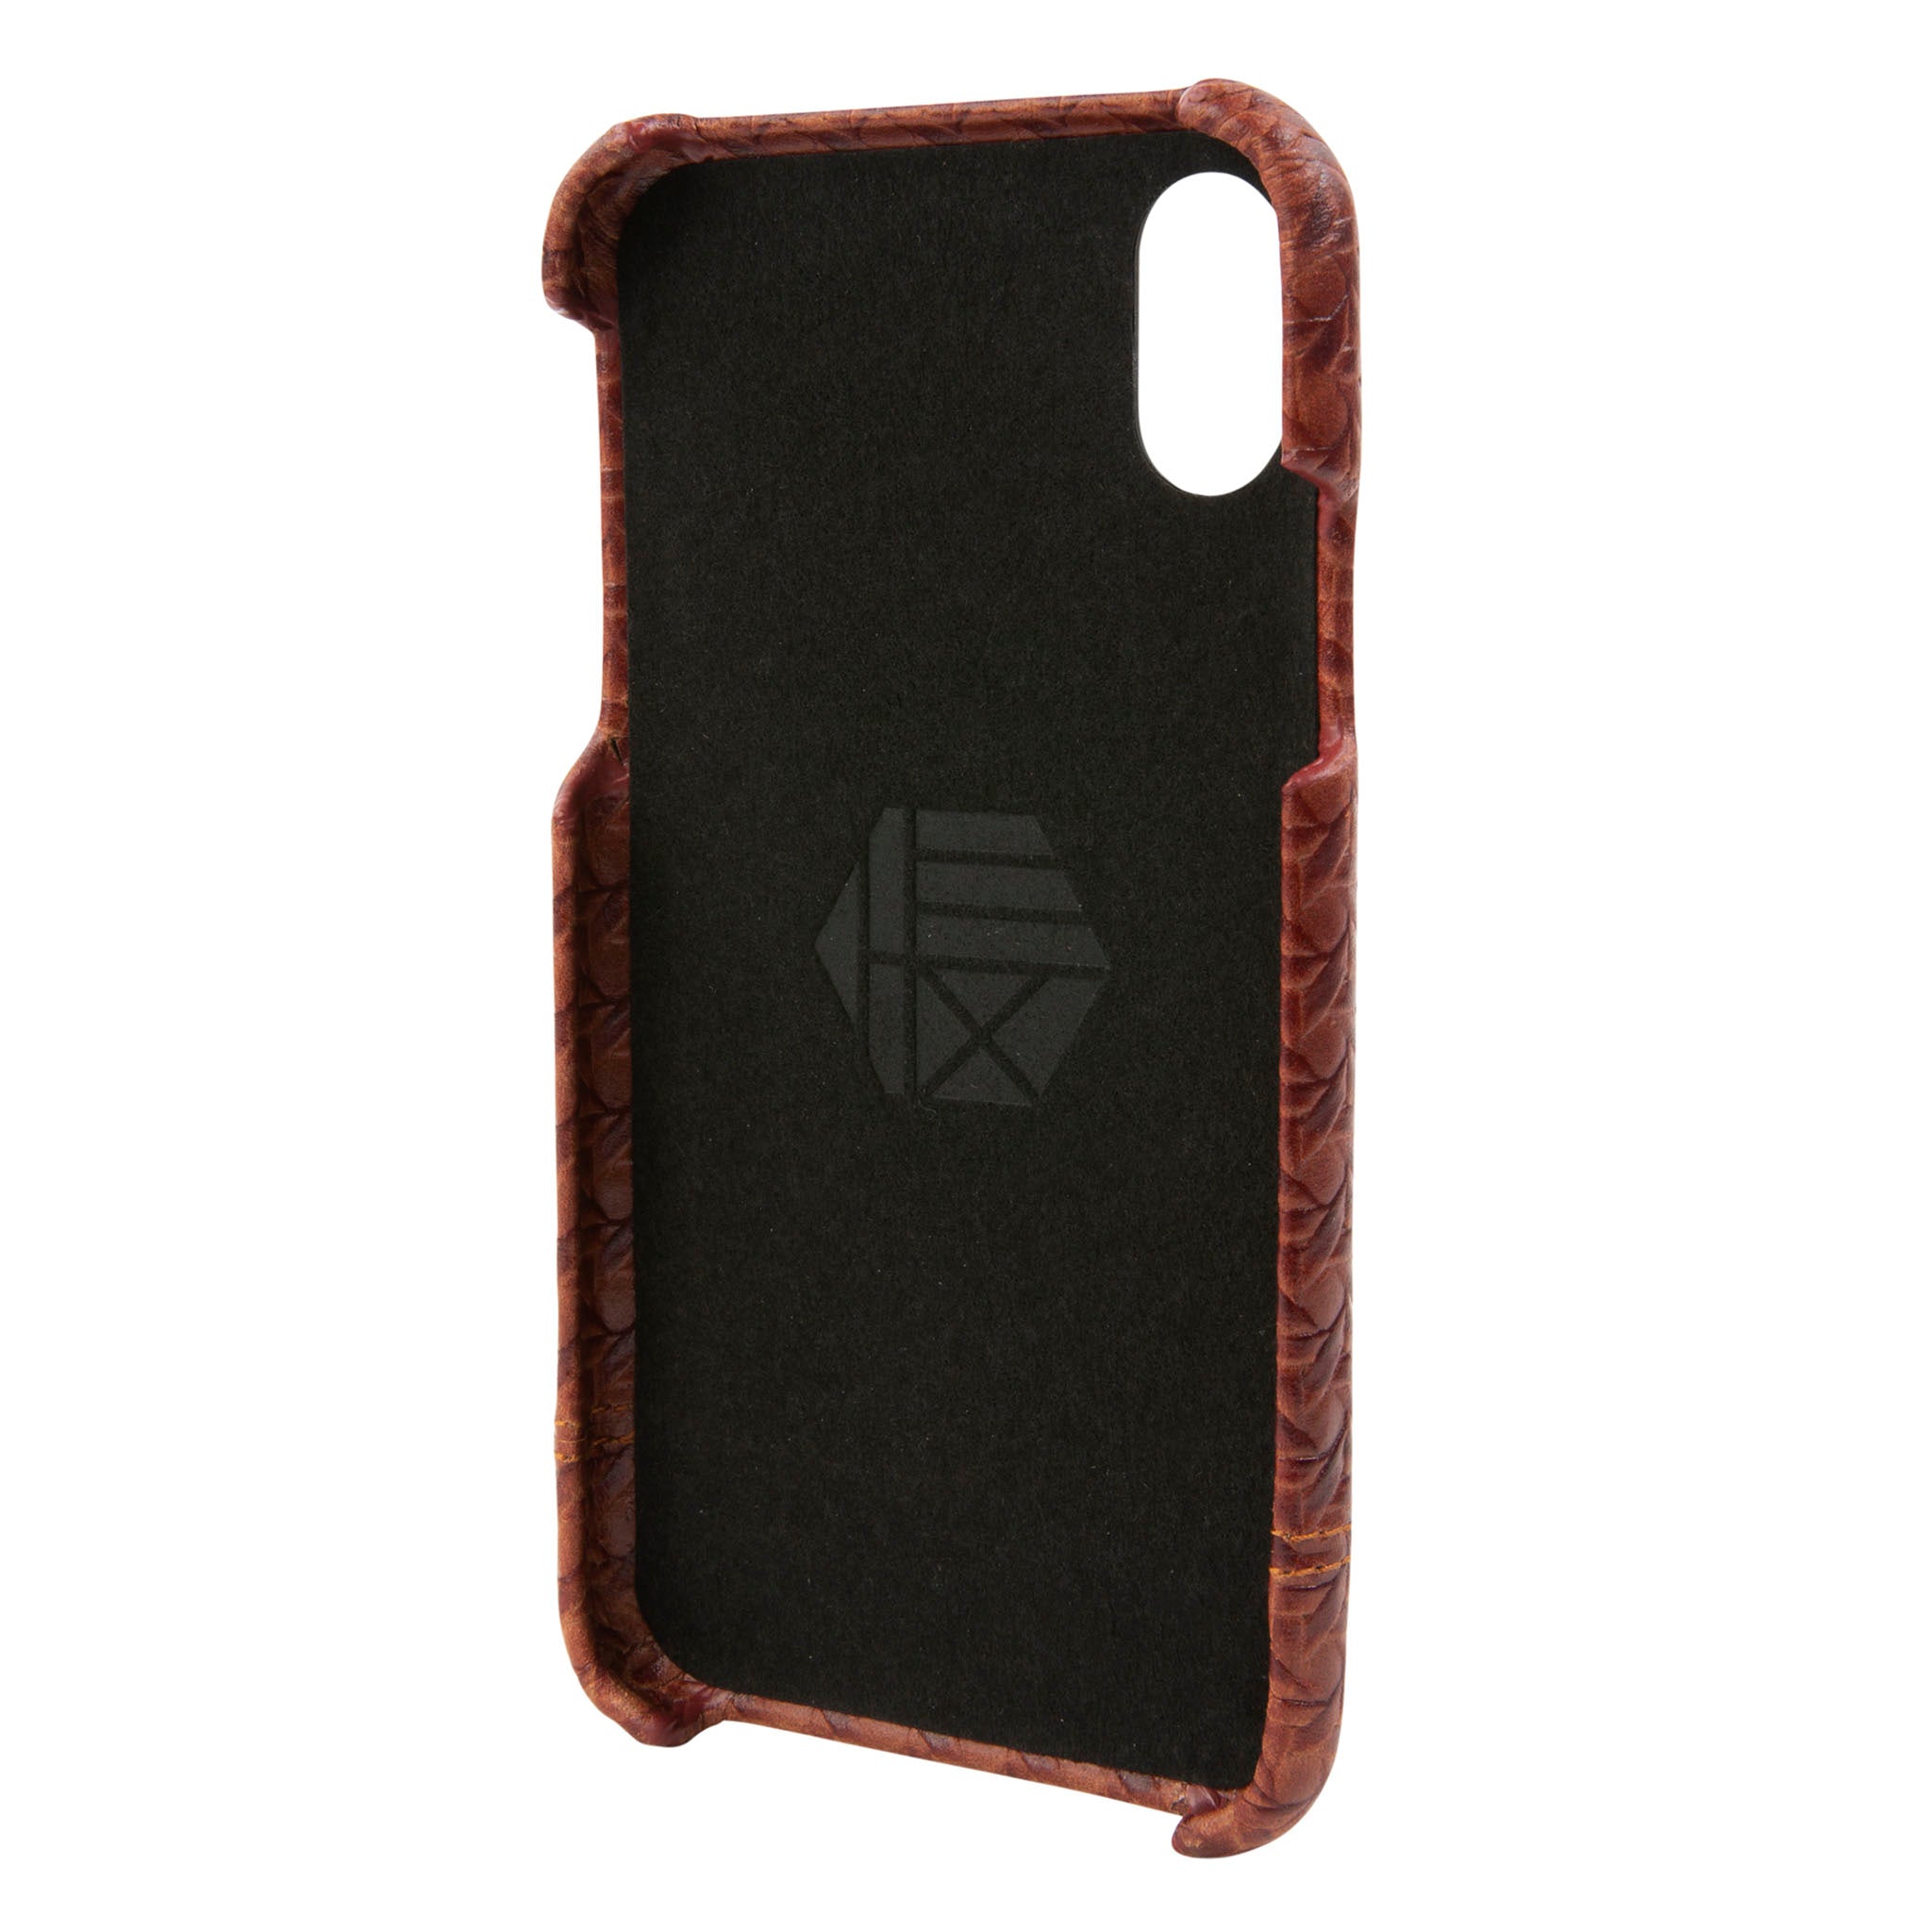 Wicker Leather Shield Wallet for iPhone Xs